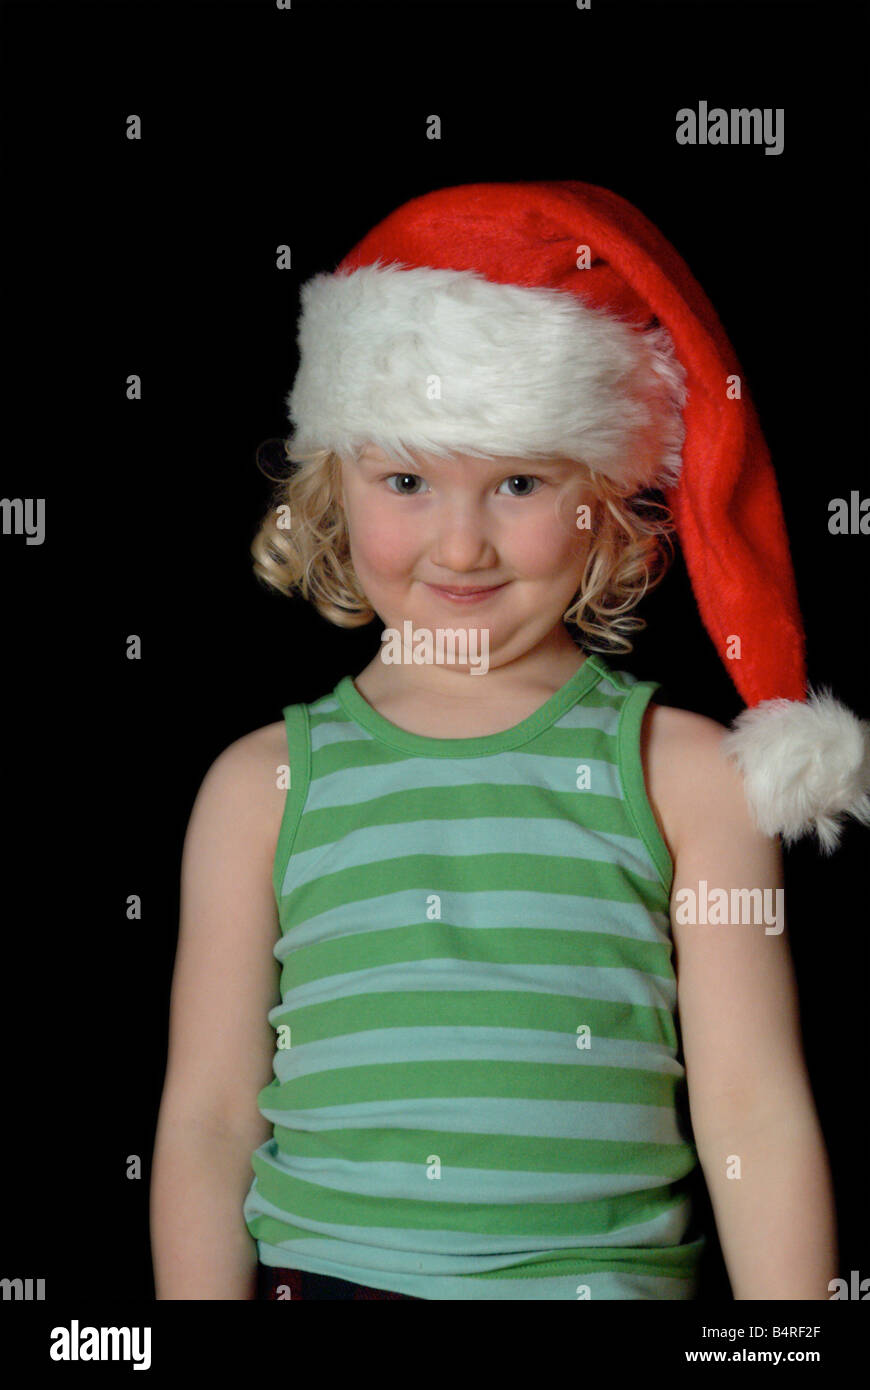 White girl wearing a red christmas hat and green stripy vest, smiling at camera Stock Photo